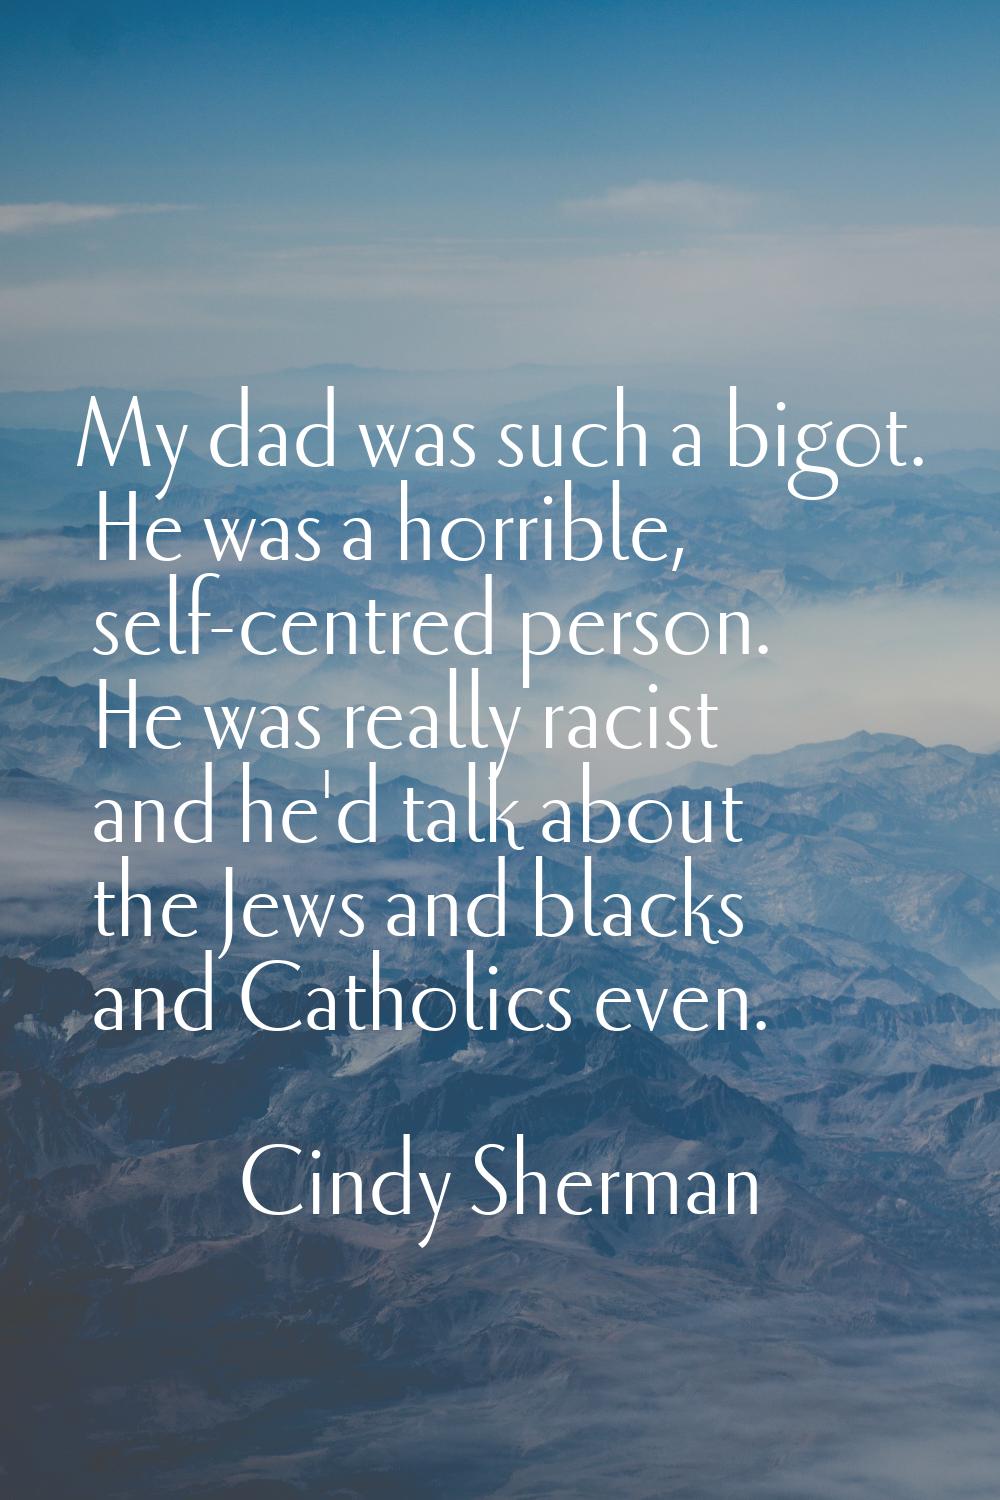 My dad was such a bigot. He was a horrible, self-centred person. He was really racist and he'd talk